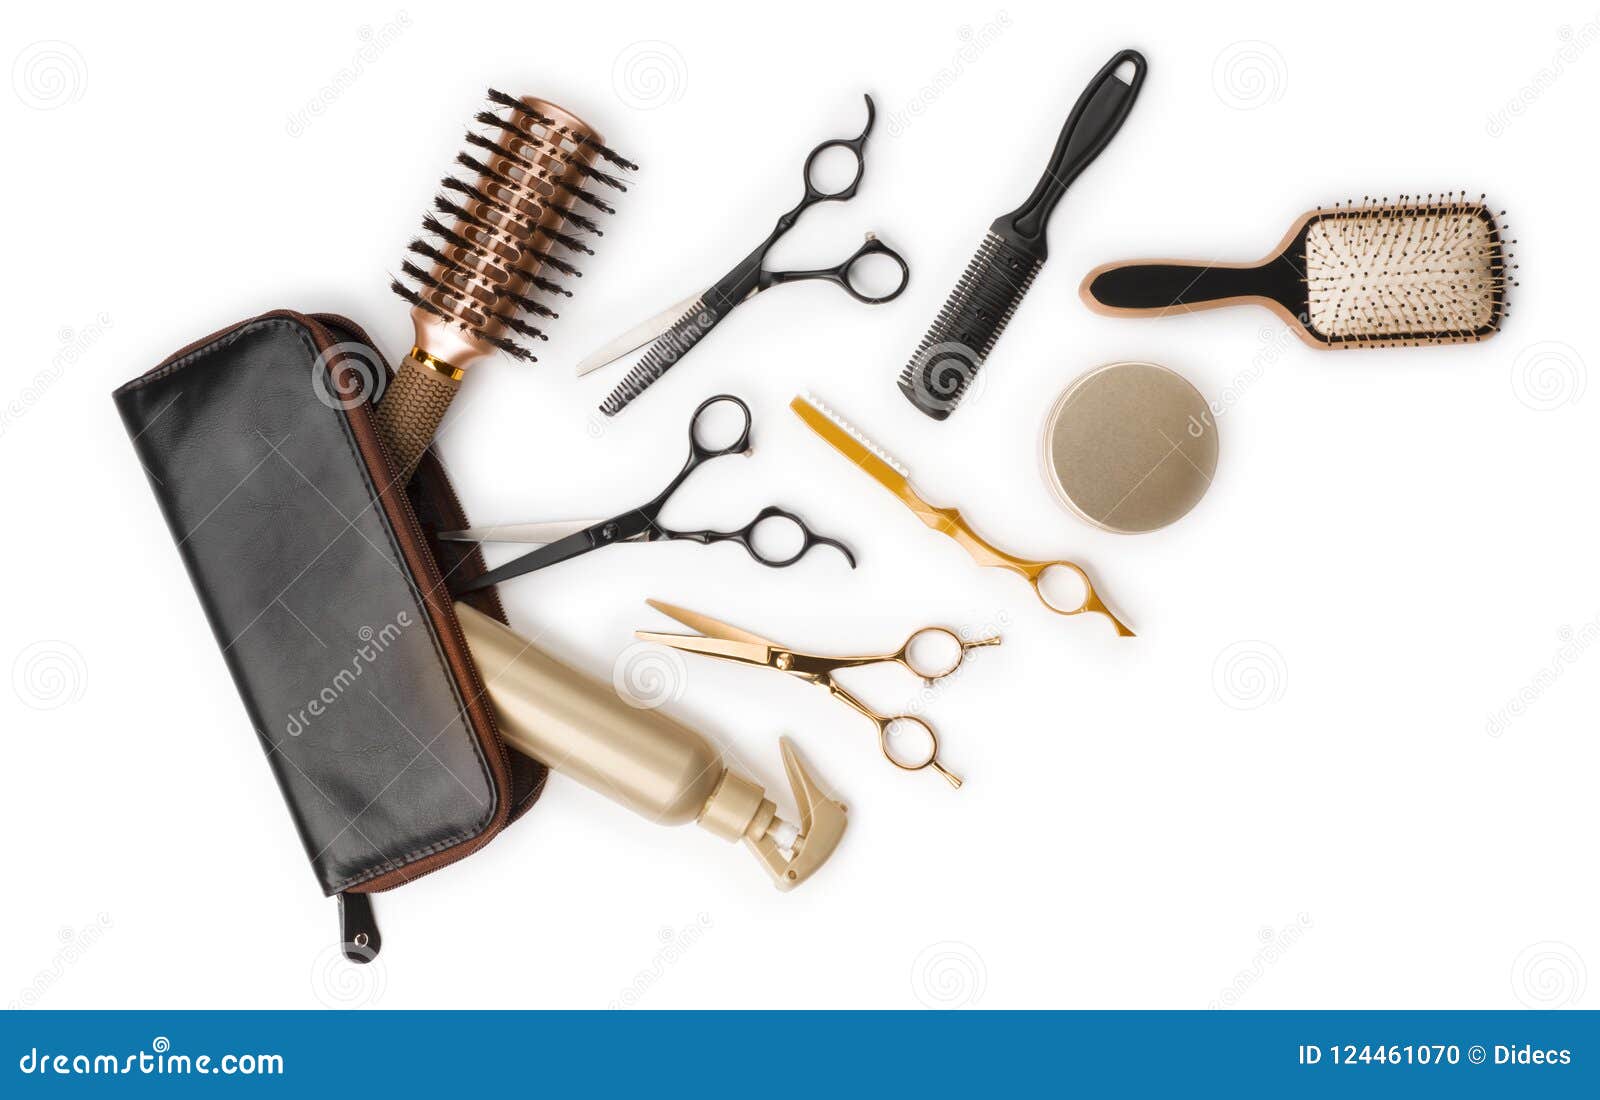 Essential Hair Dresser Tools With Leather Bag On White Background